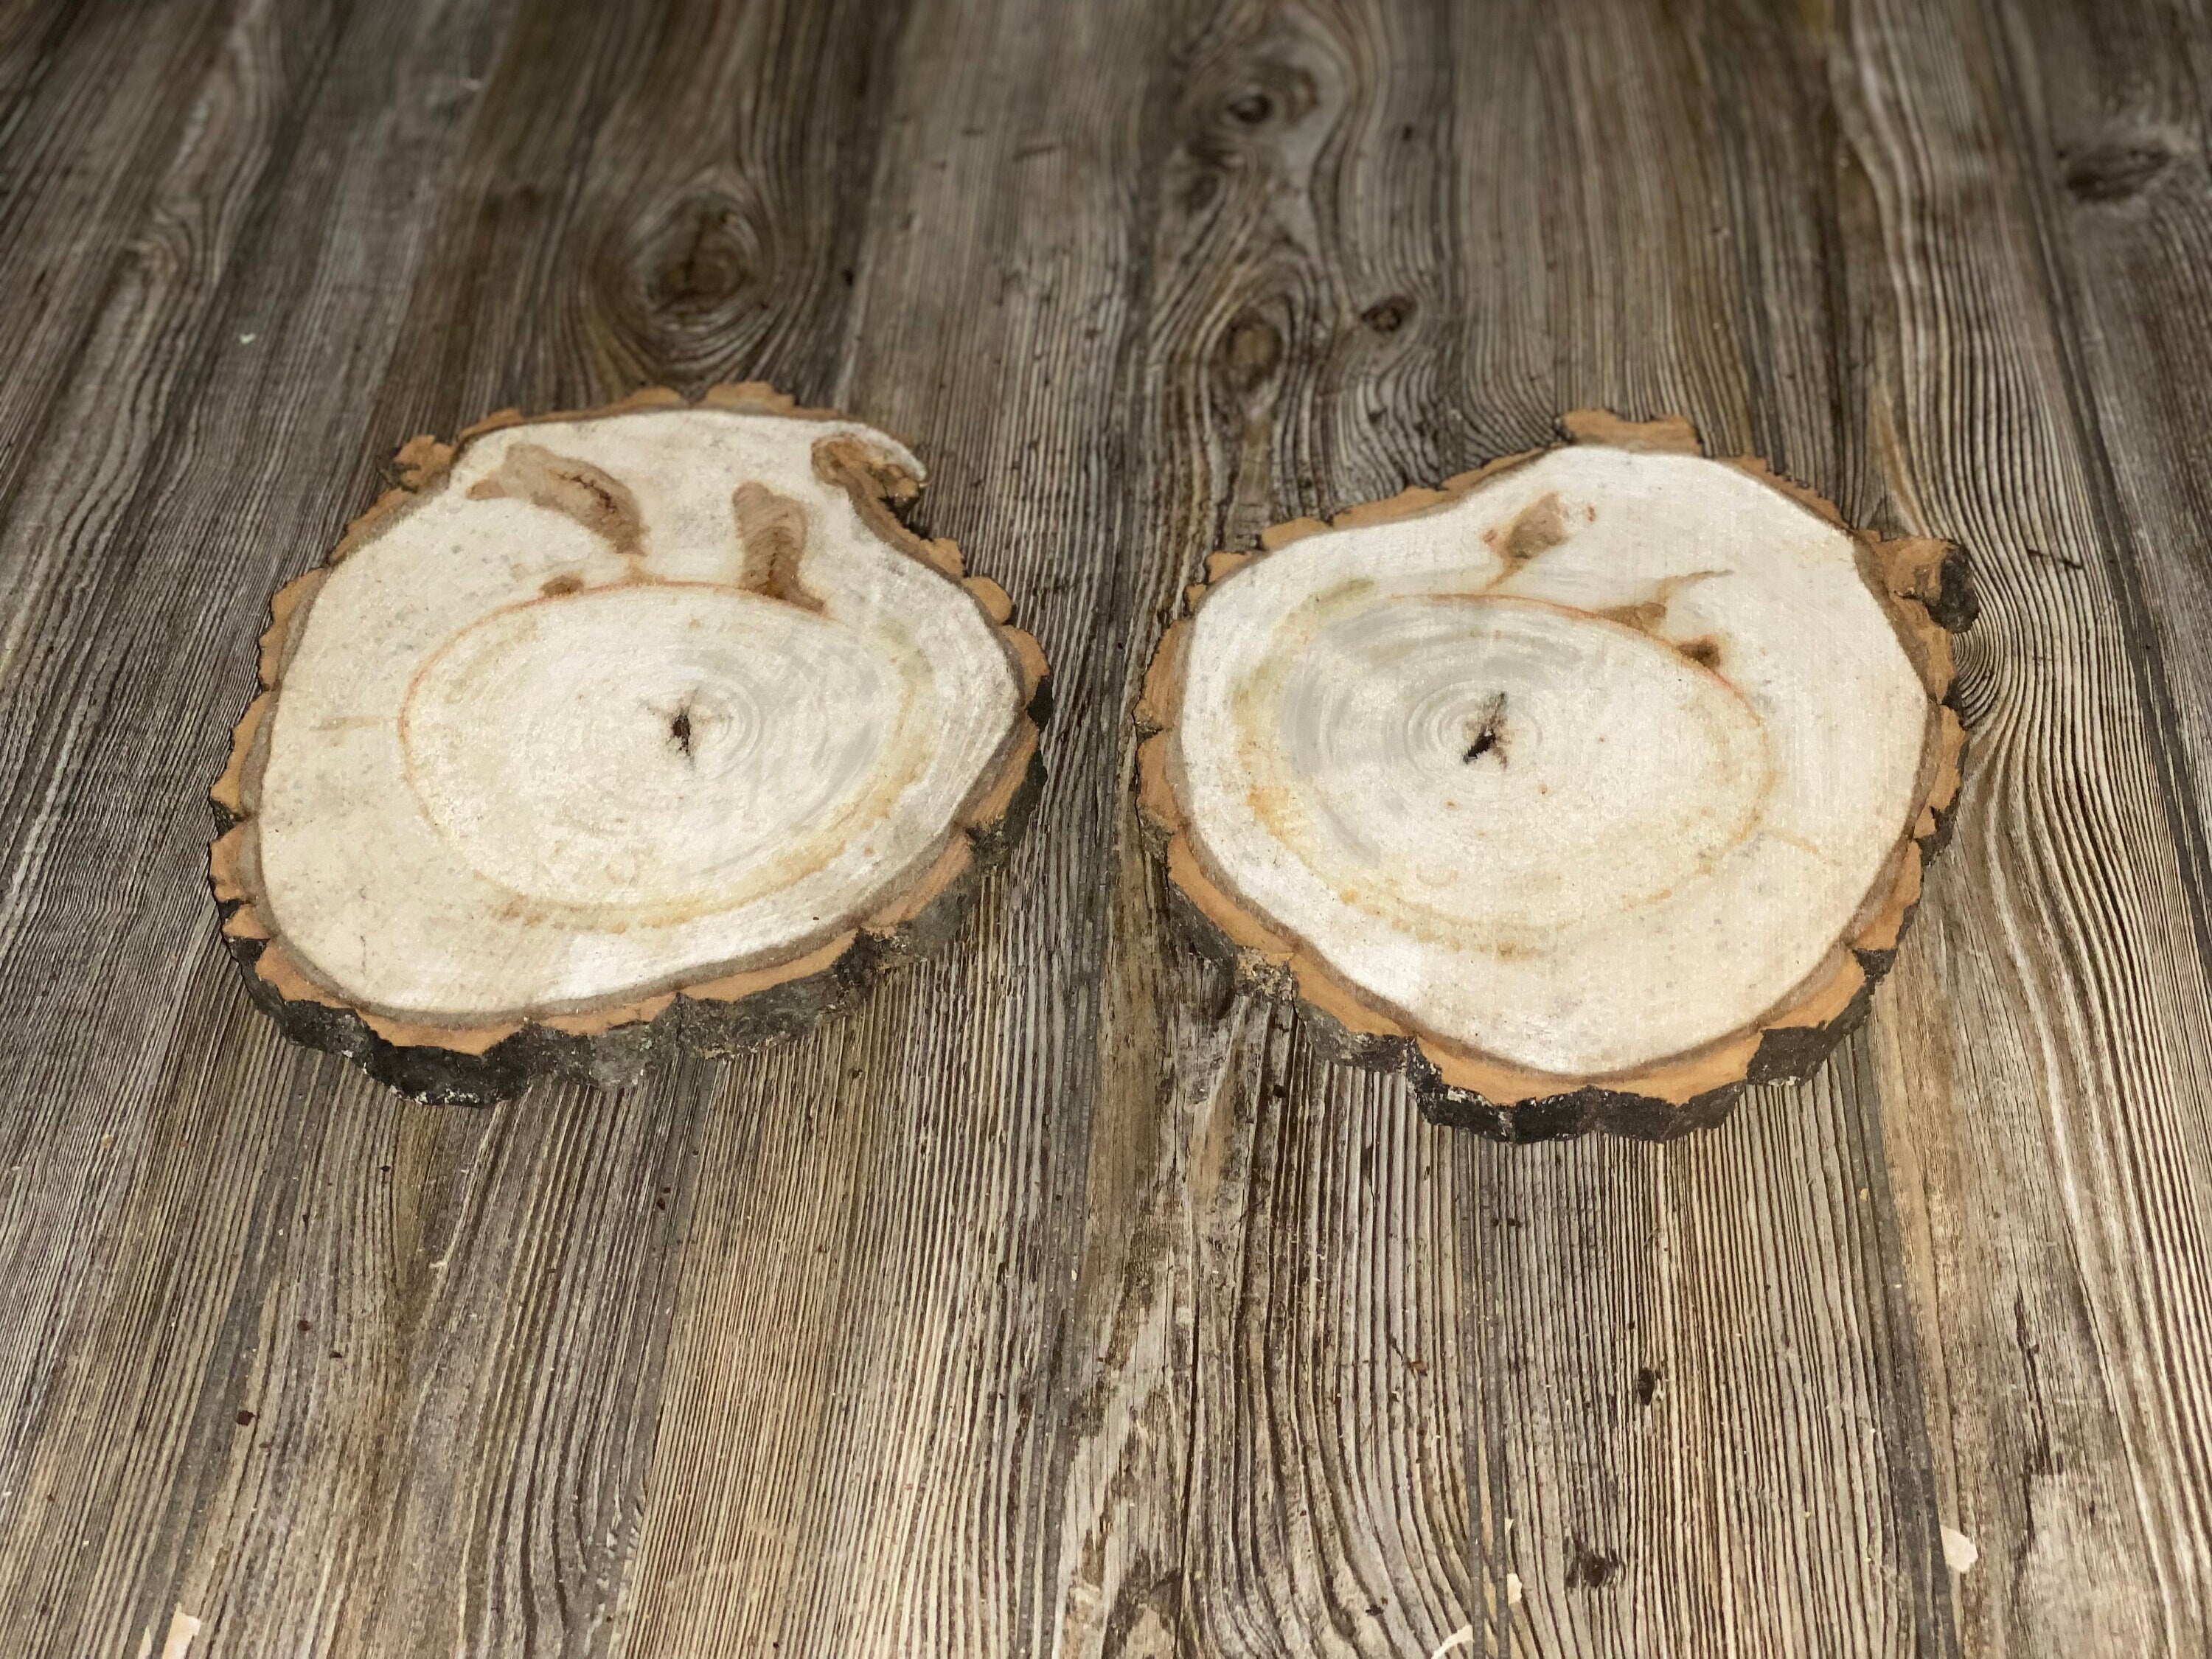 Two Similar Aspen Burl Slices, Approximately 11 Inches Long by 9 Inches Wide and 3/4 Inches Thick